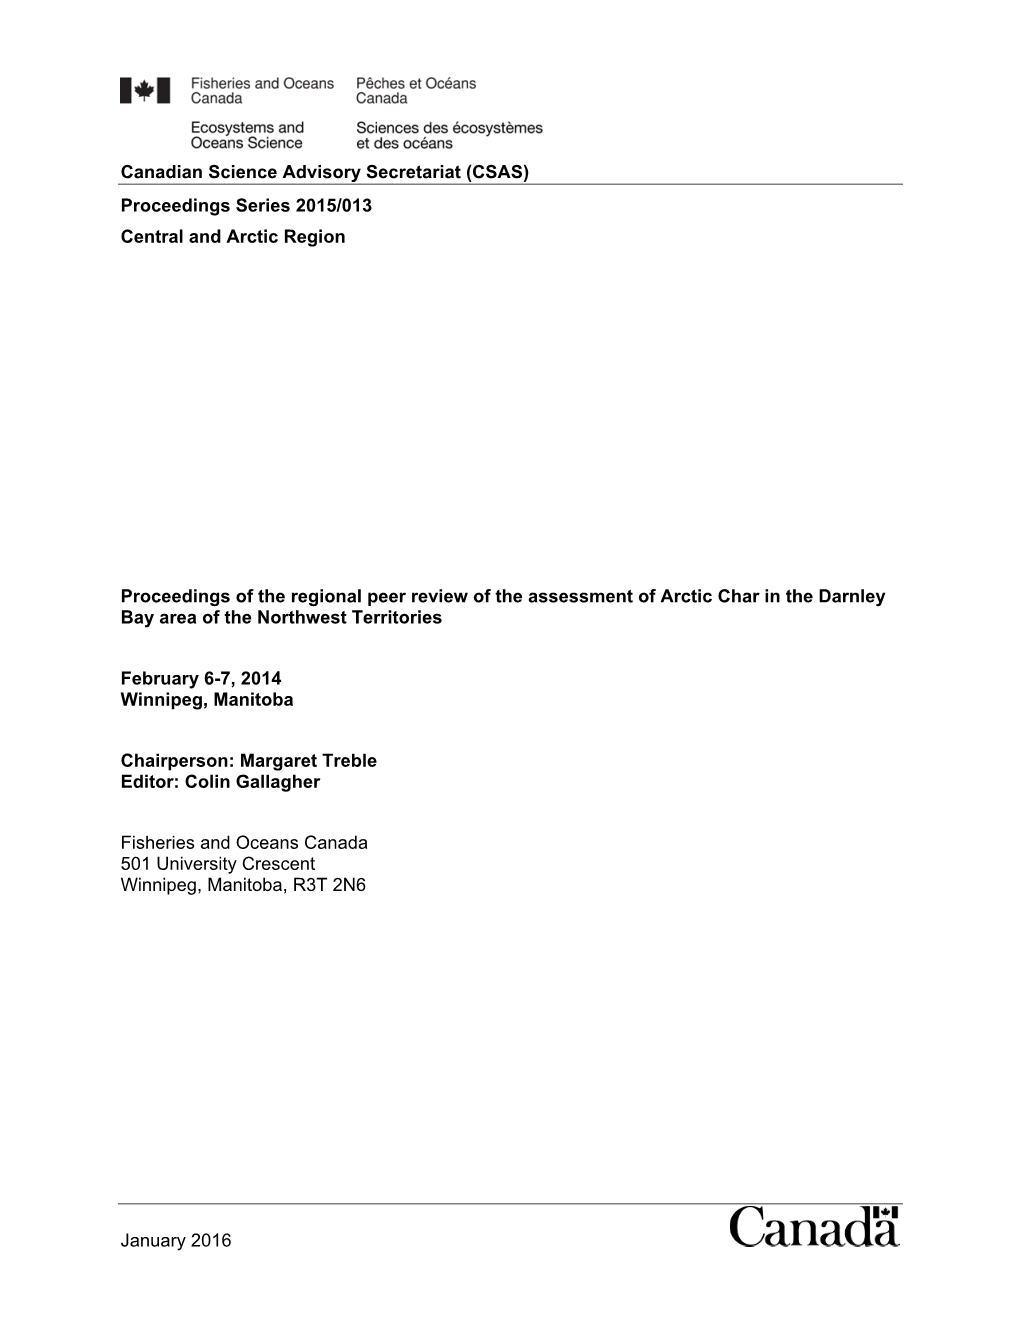 Proceedings of the Regional Peer Review of the Assessment of Arctic Char in the Darnley Bay Area of the Northwest Territories